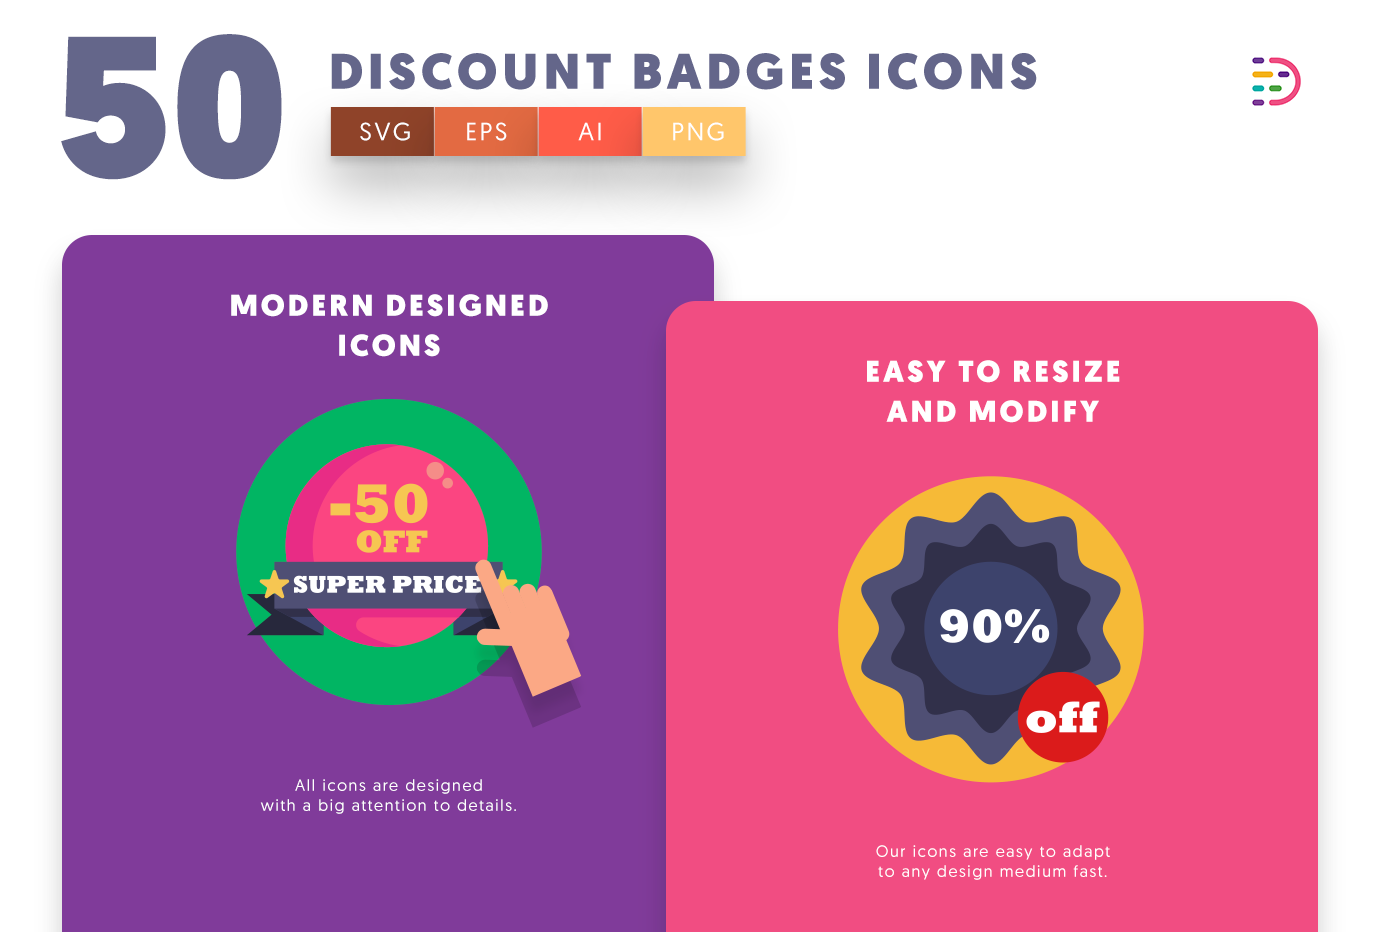 Discount Badges icons